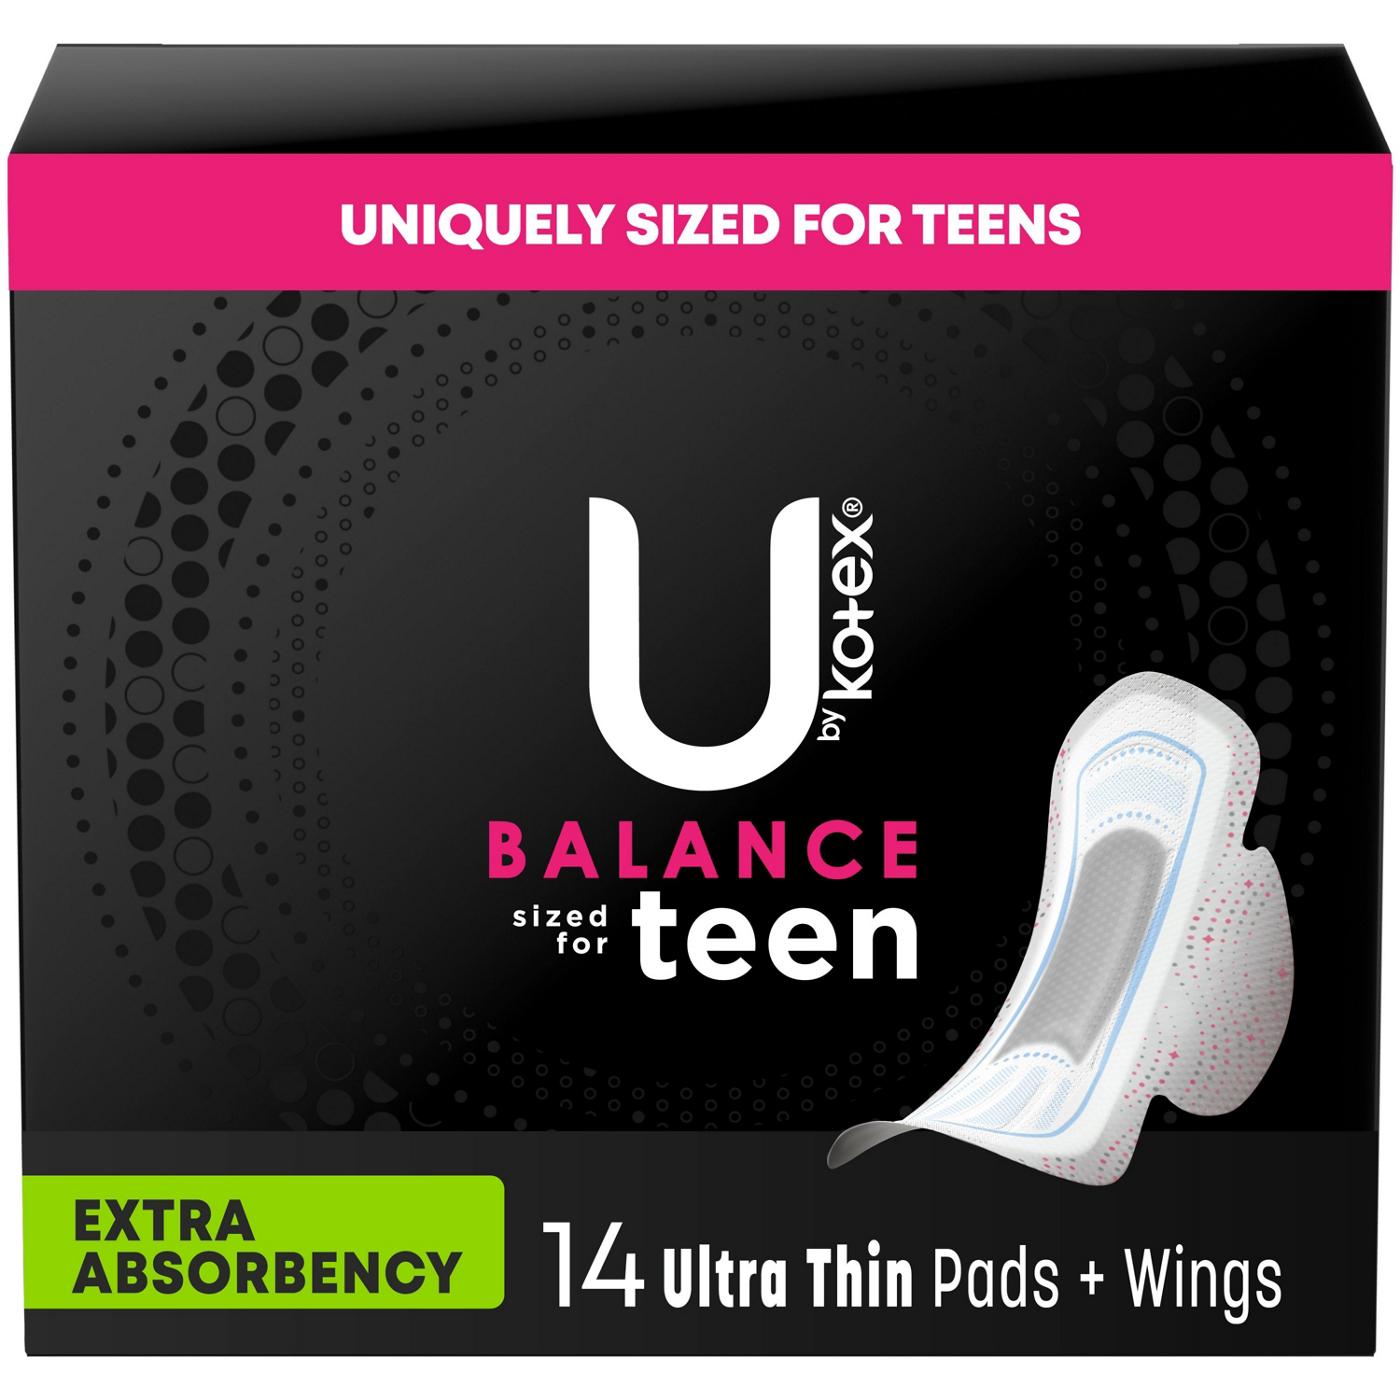 U by Kotex Balance - Sized for Teens Ultra Thin Pads with Wings - Heavy Absorbency; image 1 of 8